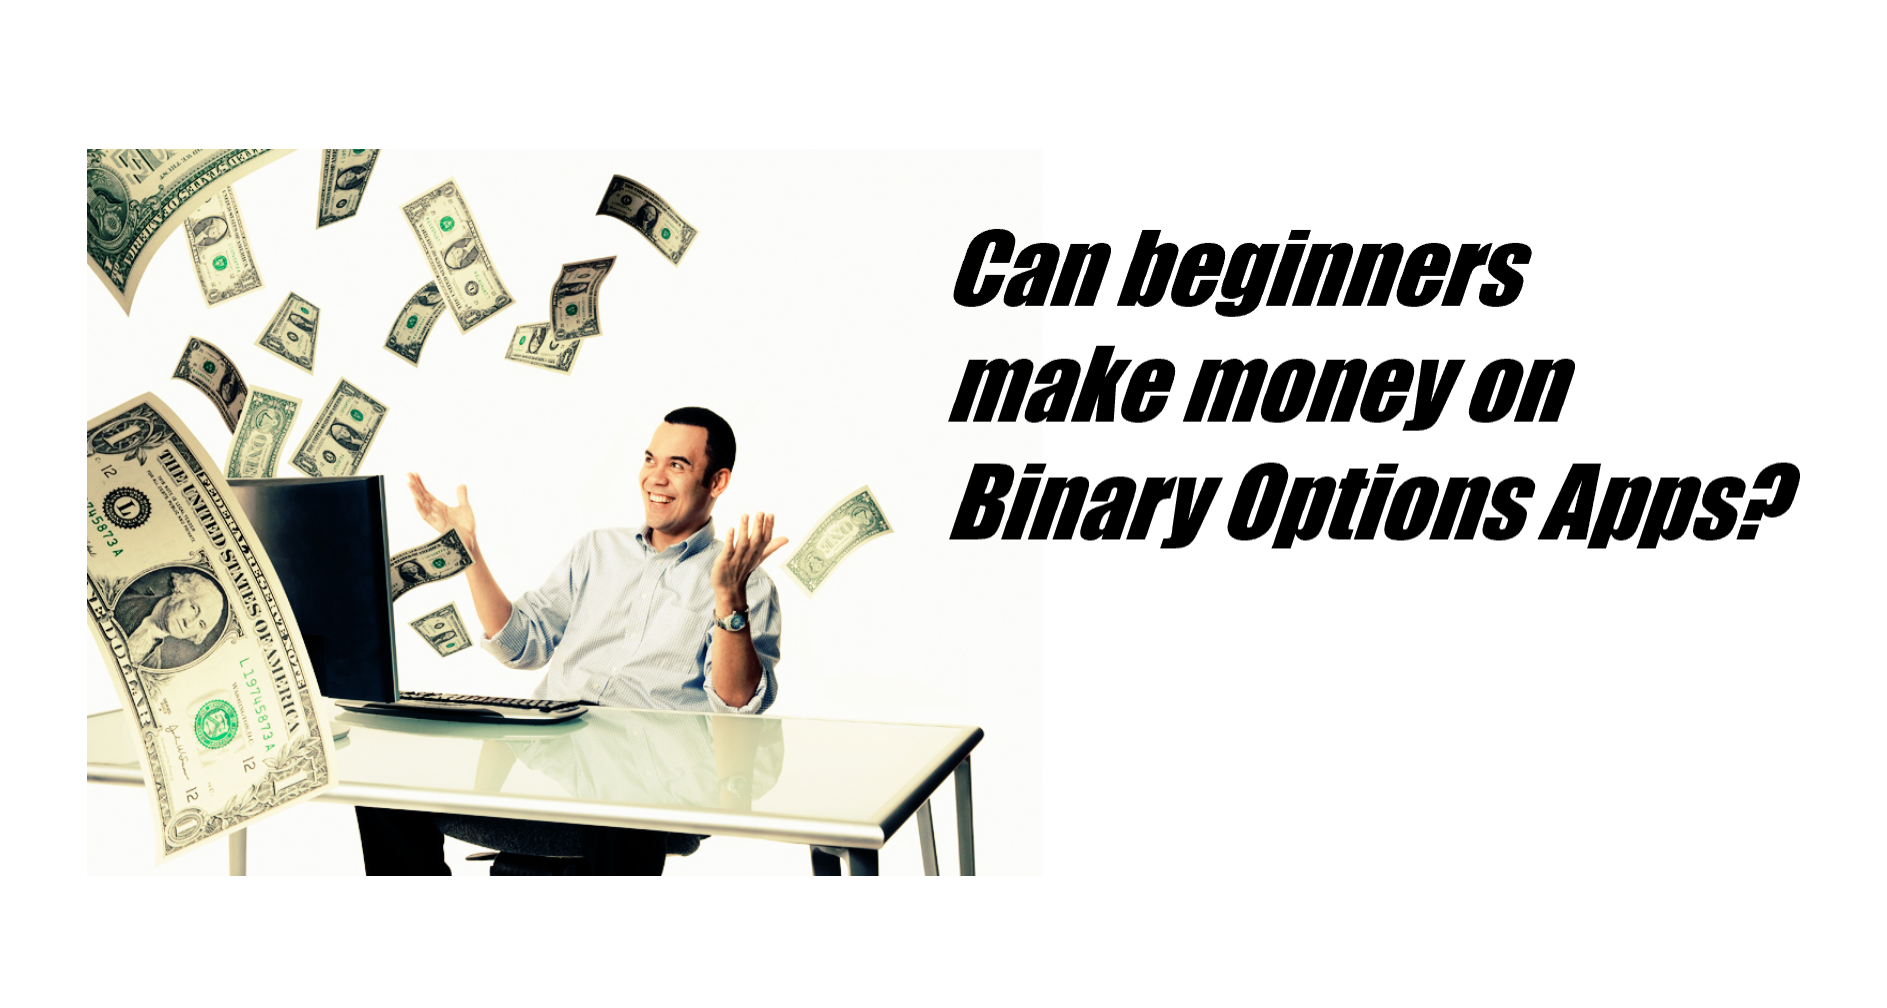 Can beginners make money on Binary Options Apps? 